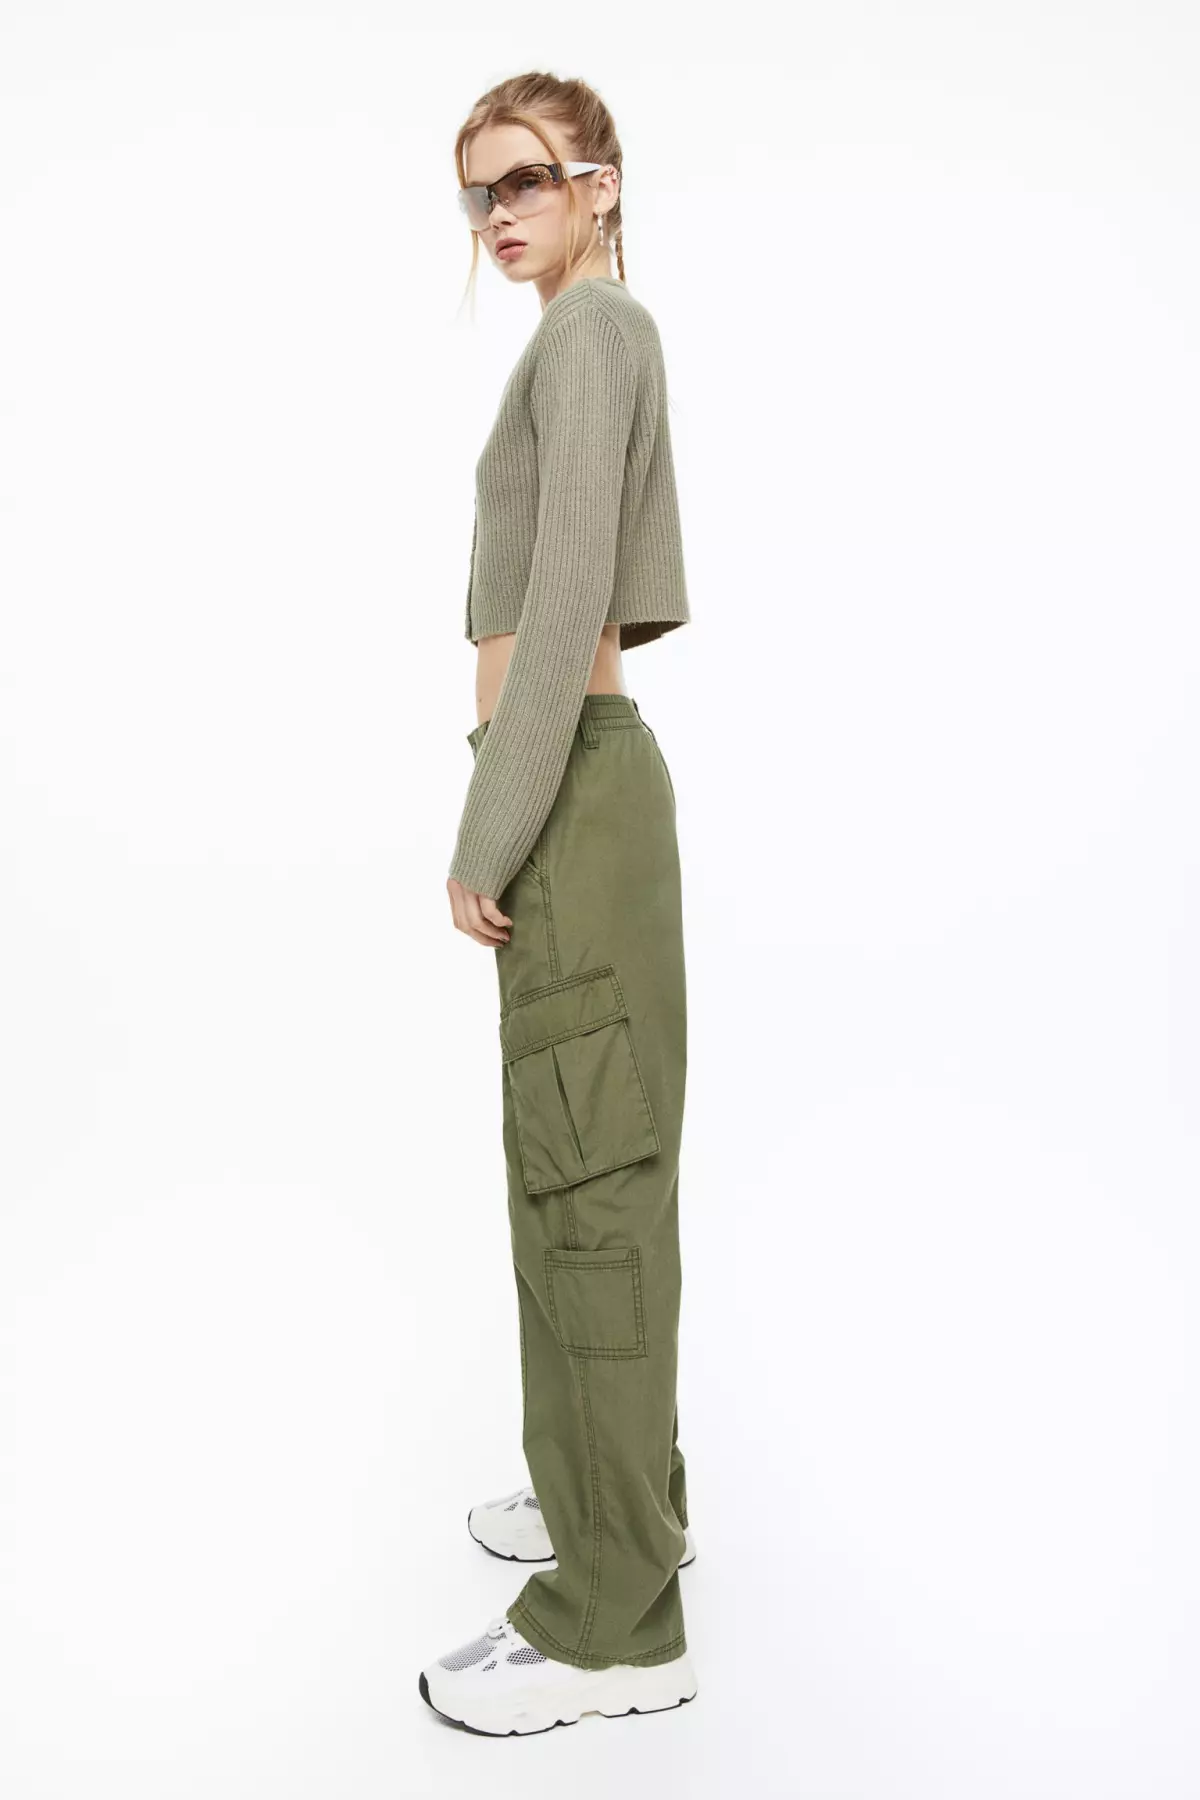 woman wearing cargo pants from H&M